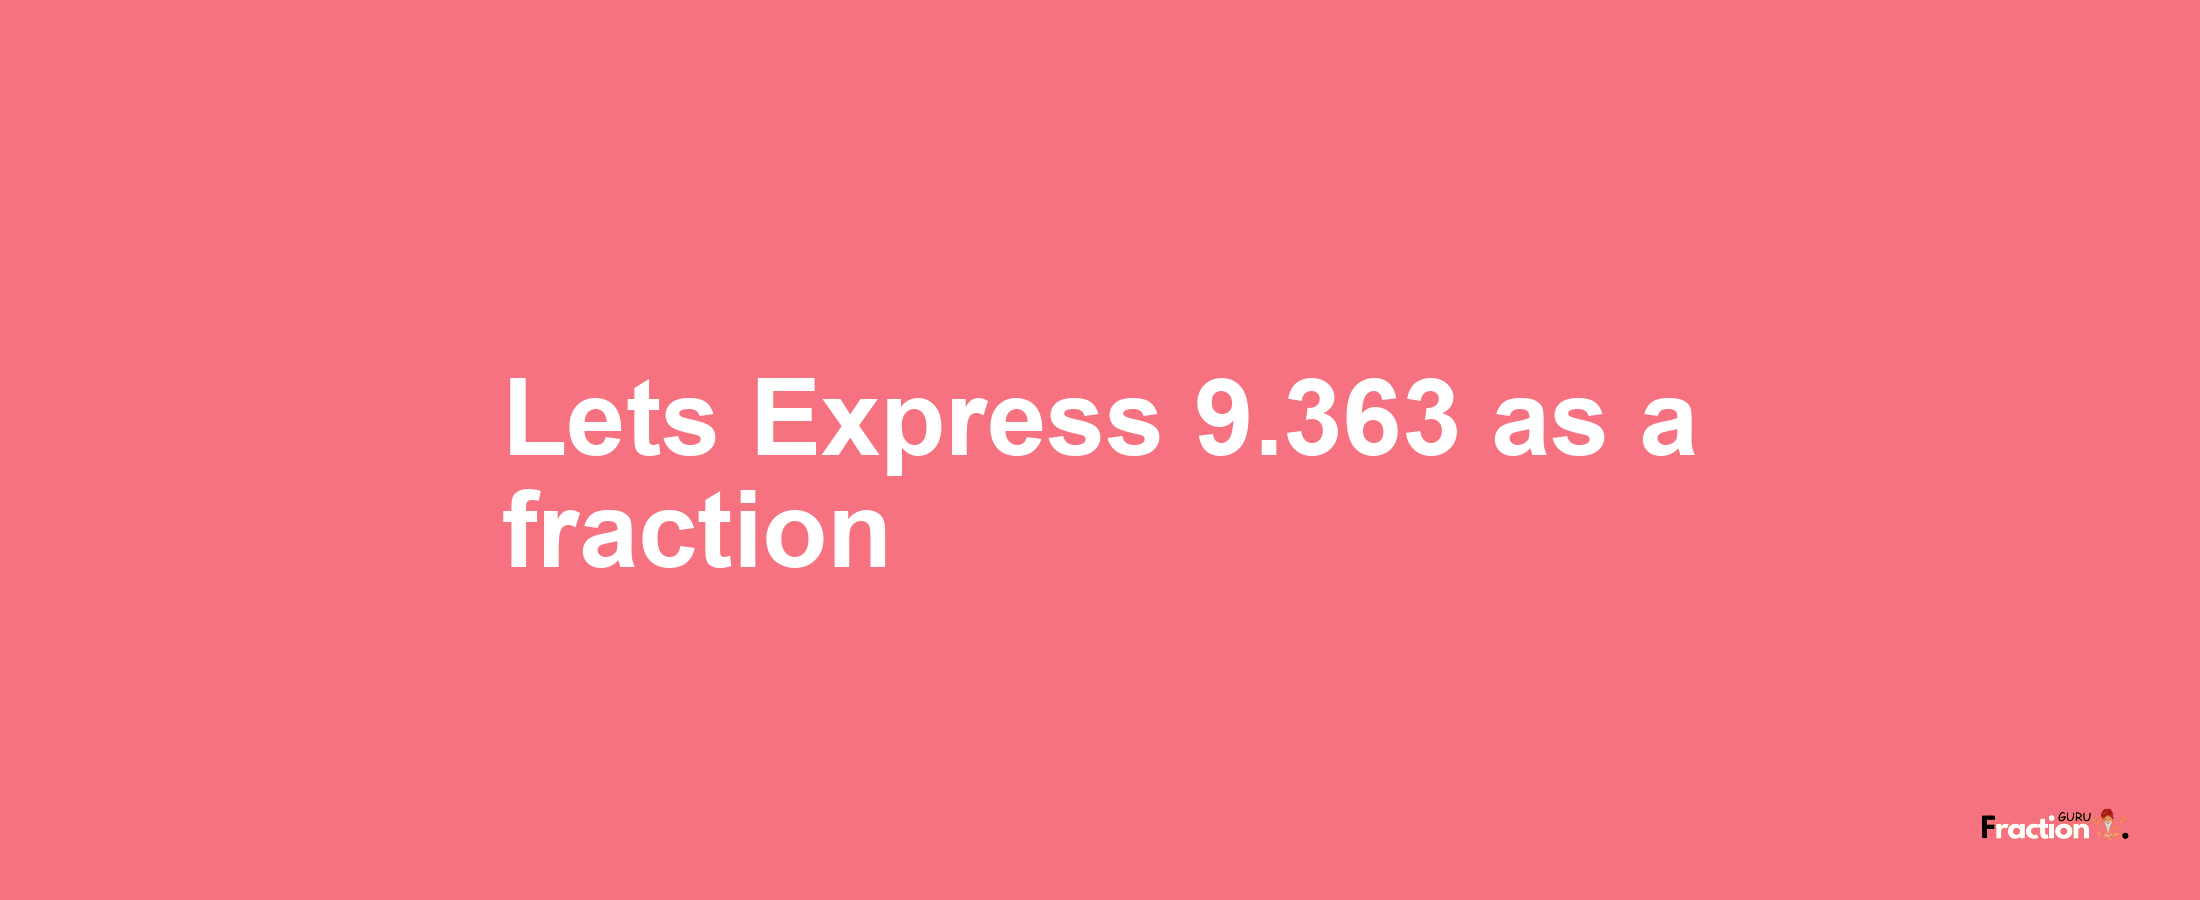 Lets Express 9.363 as afraction